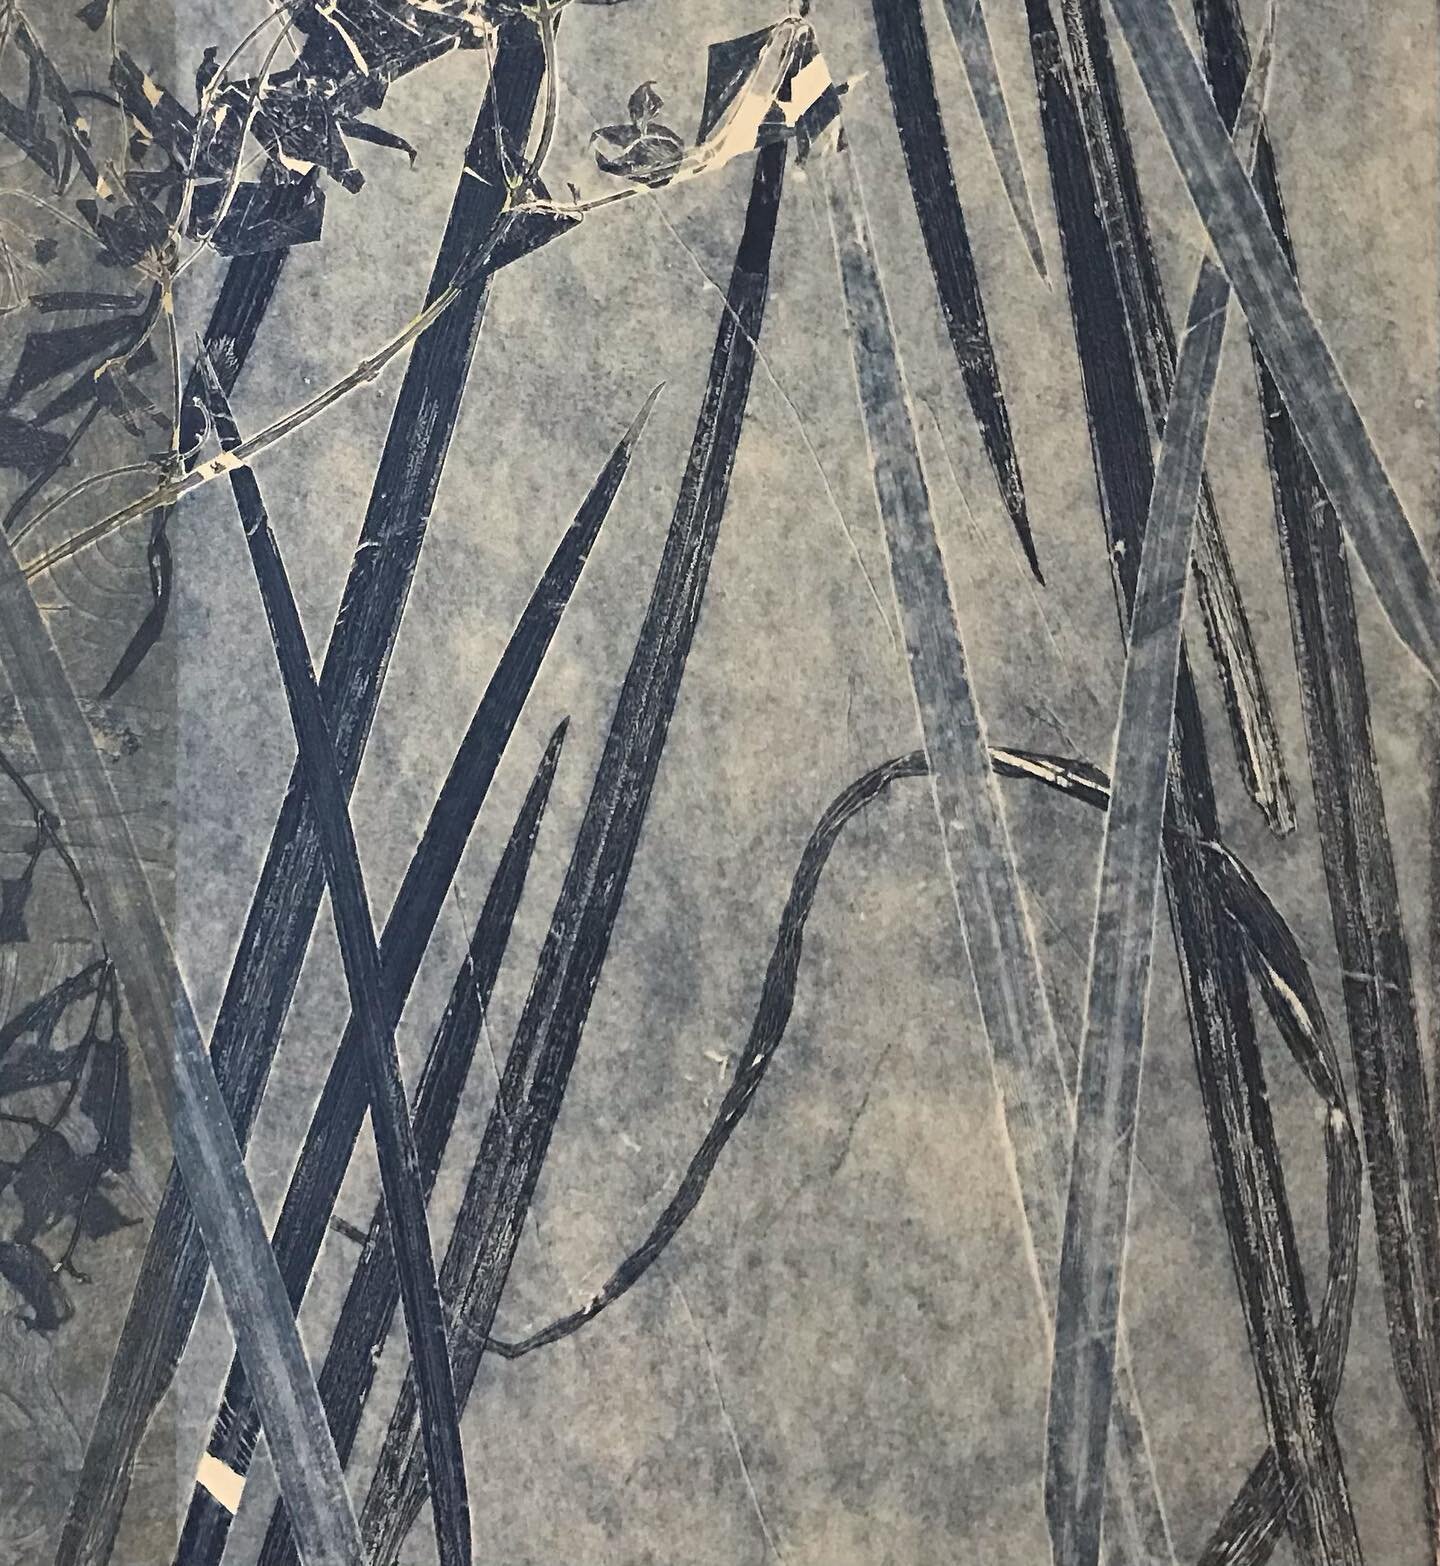 Been experimenting with different ways recently to translate the diminishing perspective &ldquo;cathedral&rdquo; effect of a forest onto corrosion and print works. It&rsquo;s hard! Shown here: detail of a work-in-progress monoprint. 
.
. 
#makeyourow